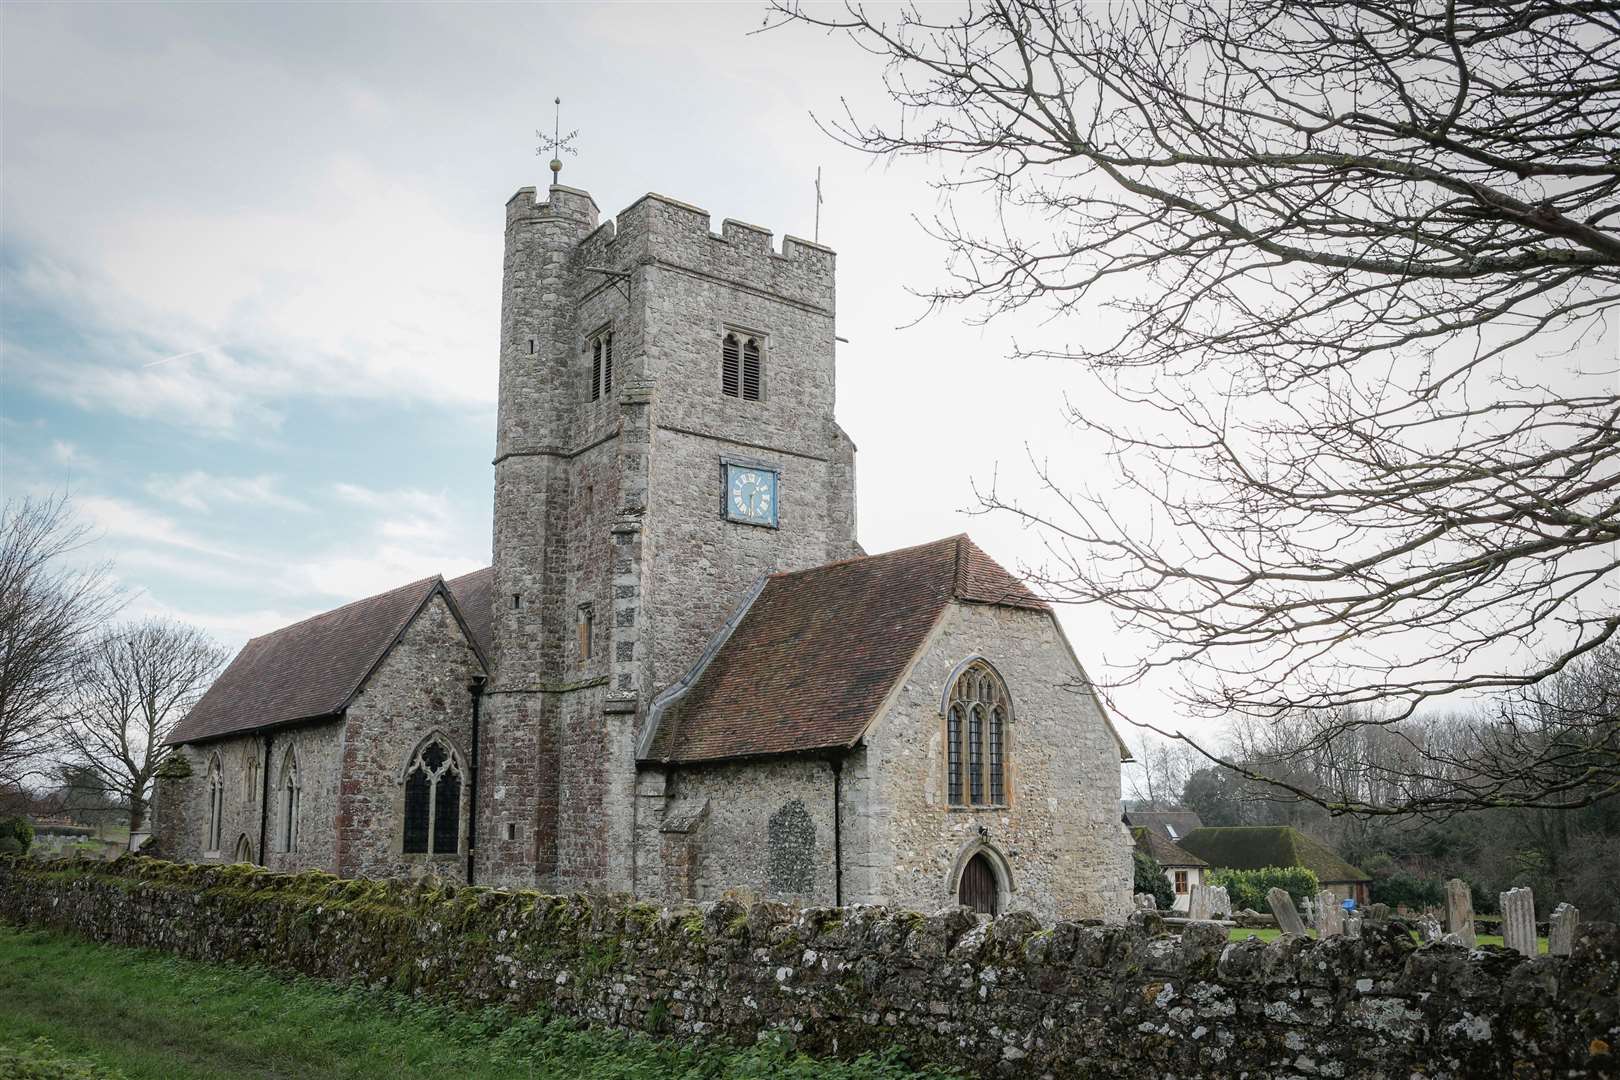 St Mary's and All Saints Church, Boxley, was targeted by thieves